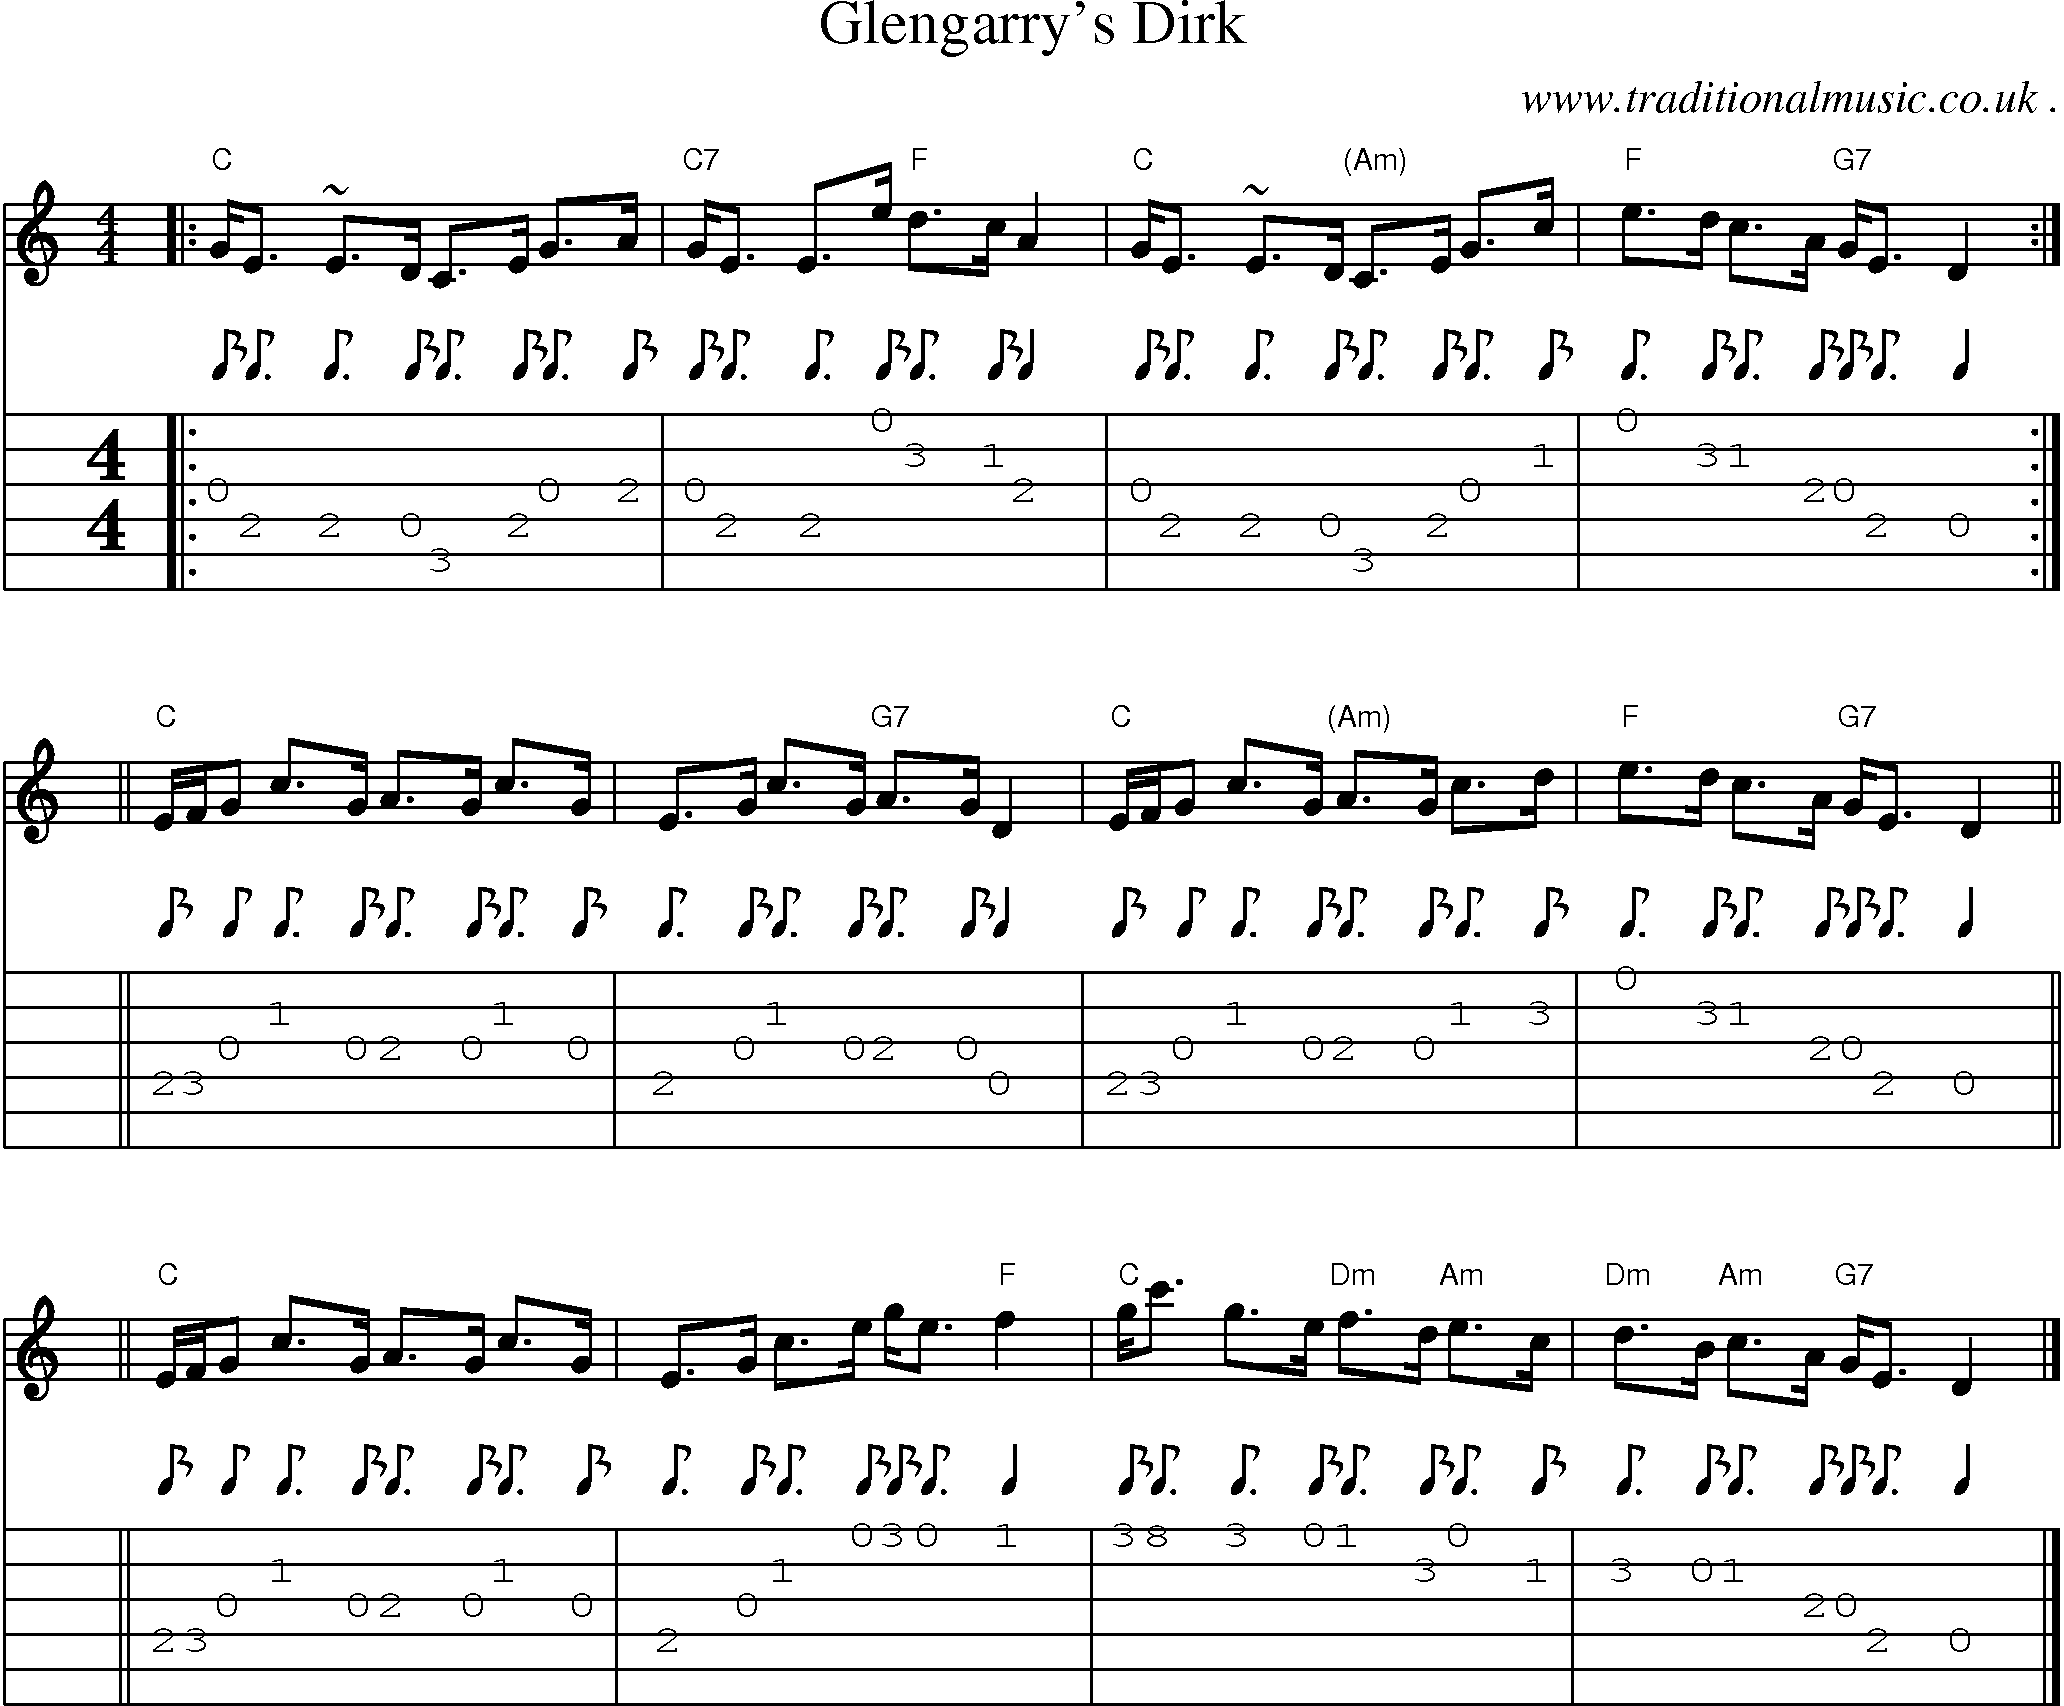 Sheet-music  score, Chords and Guitar Tabs for Glengarrys Dirk